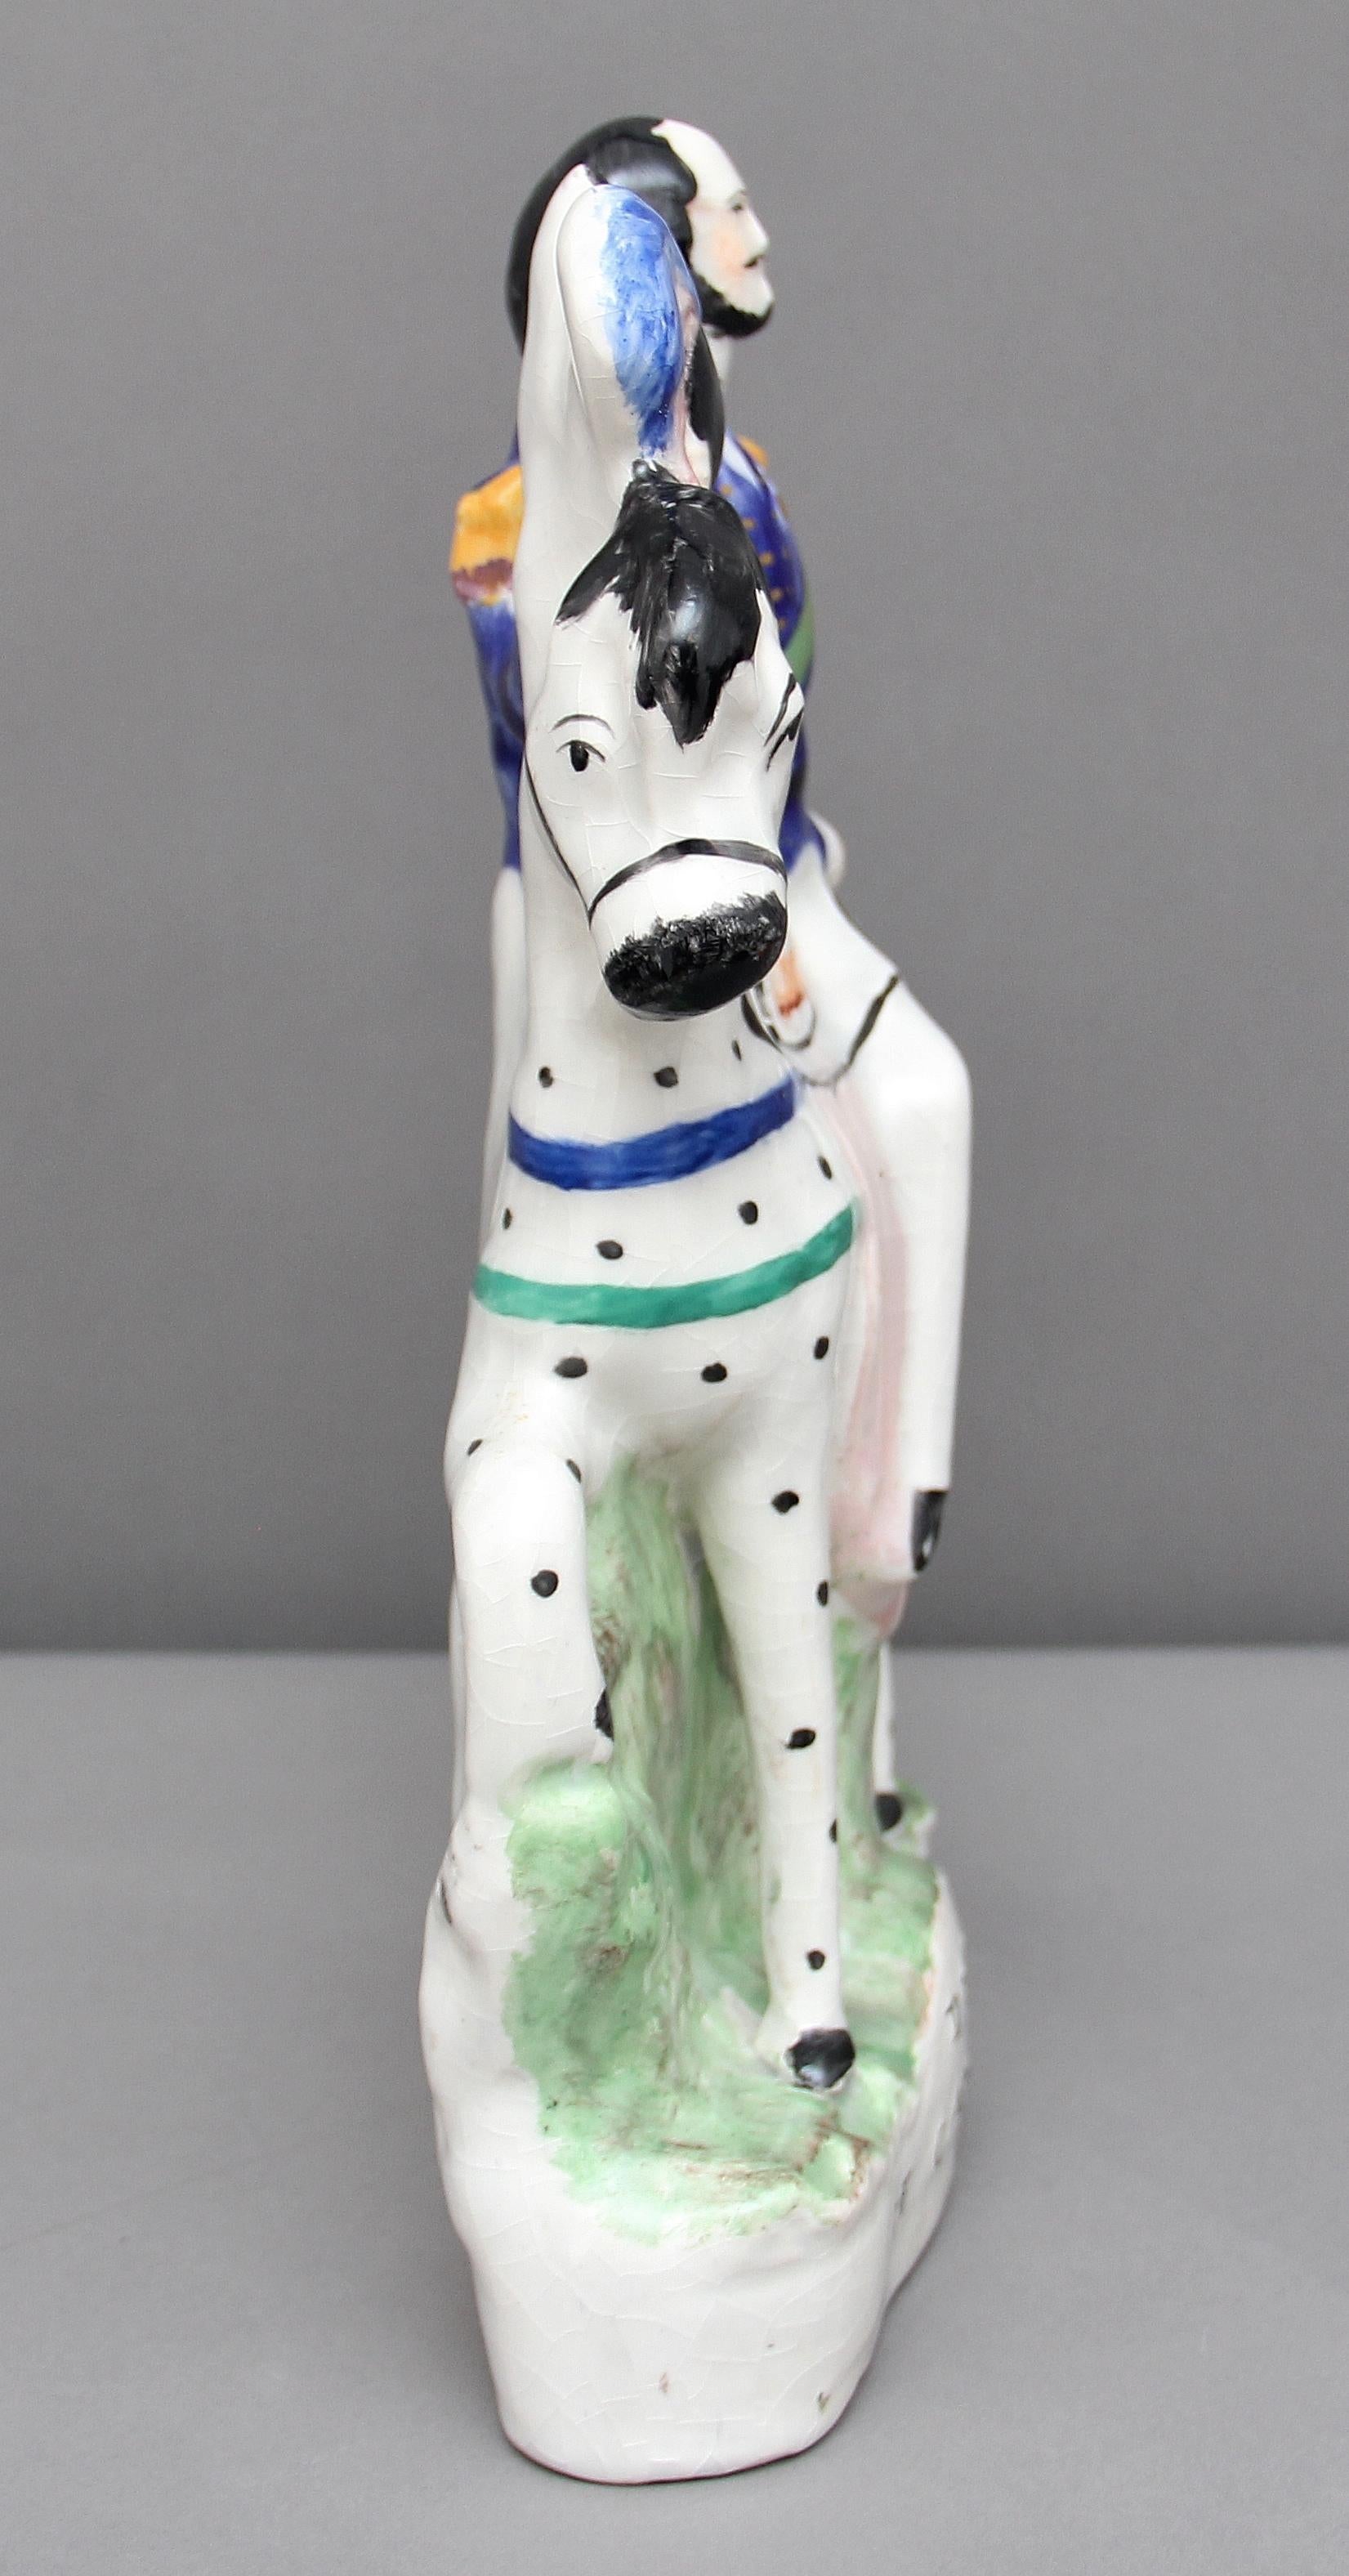 19th century Staffordshire figure of the Duke of Cambridge, lovely colors in in very good condition, circa 1854.